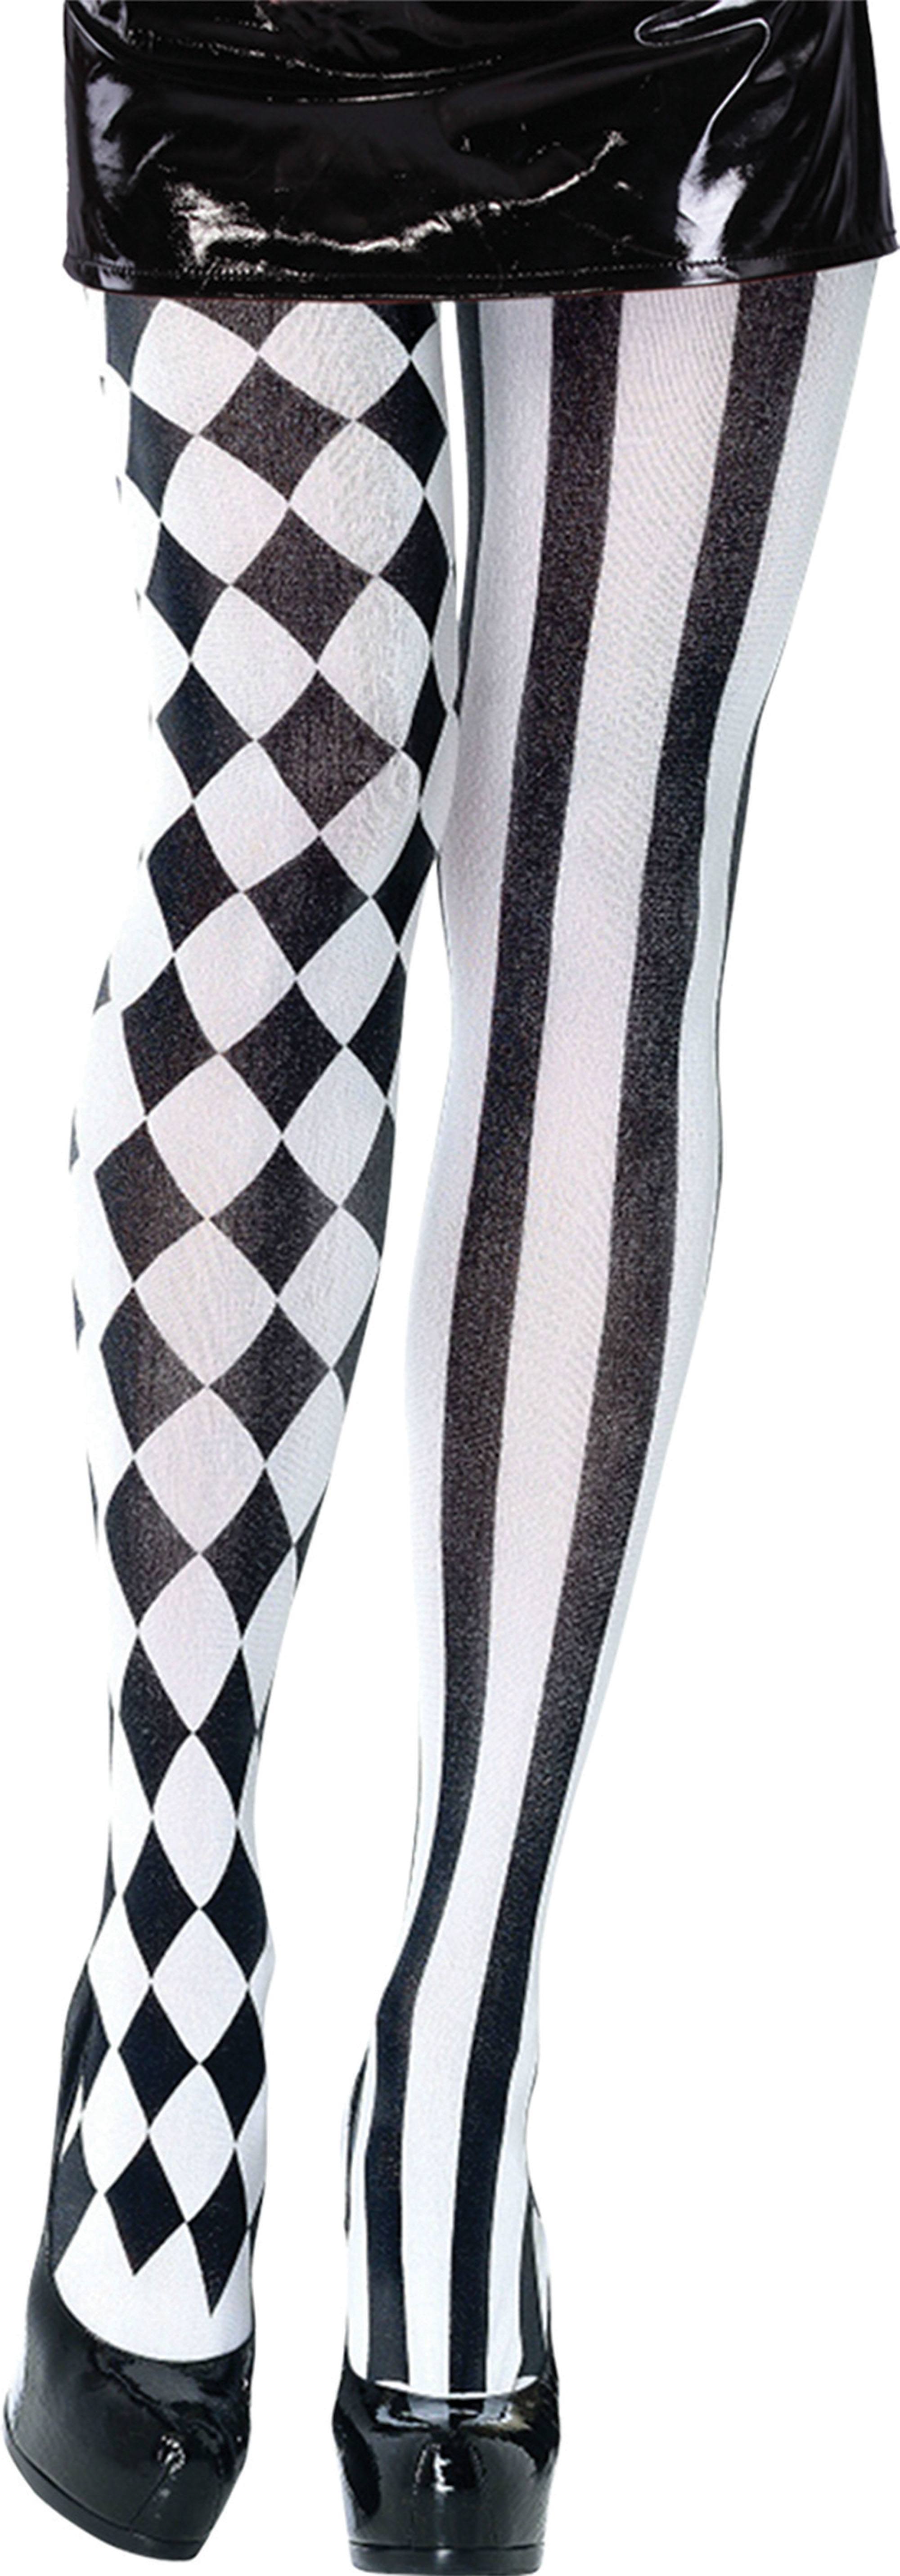 Harlequin_Tights_Black_and_White